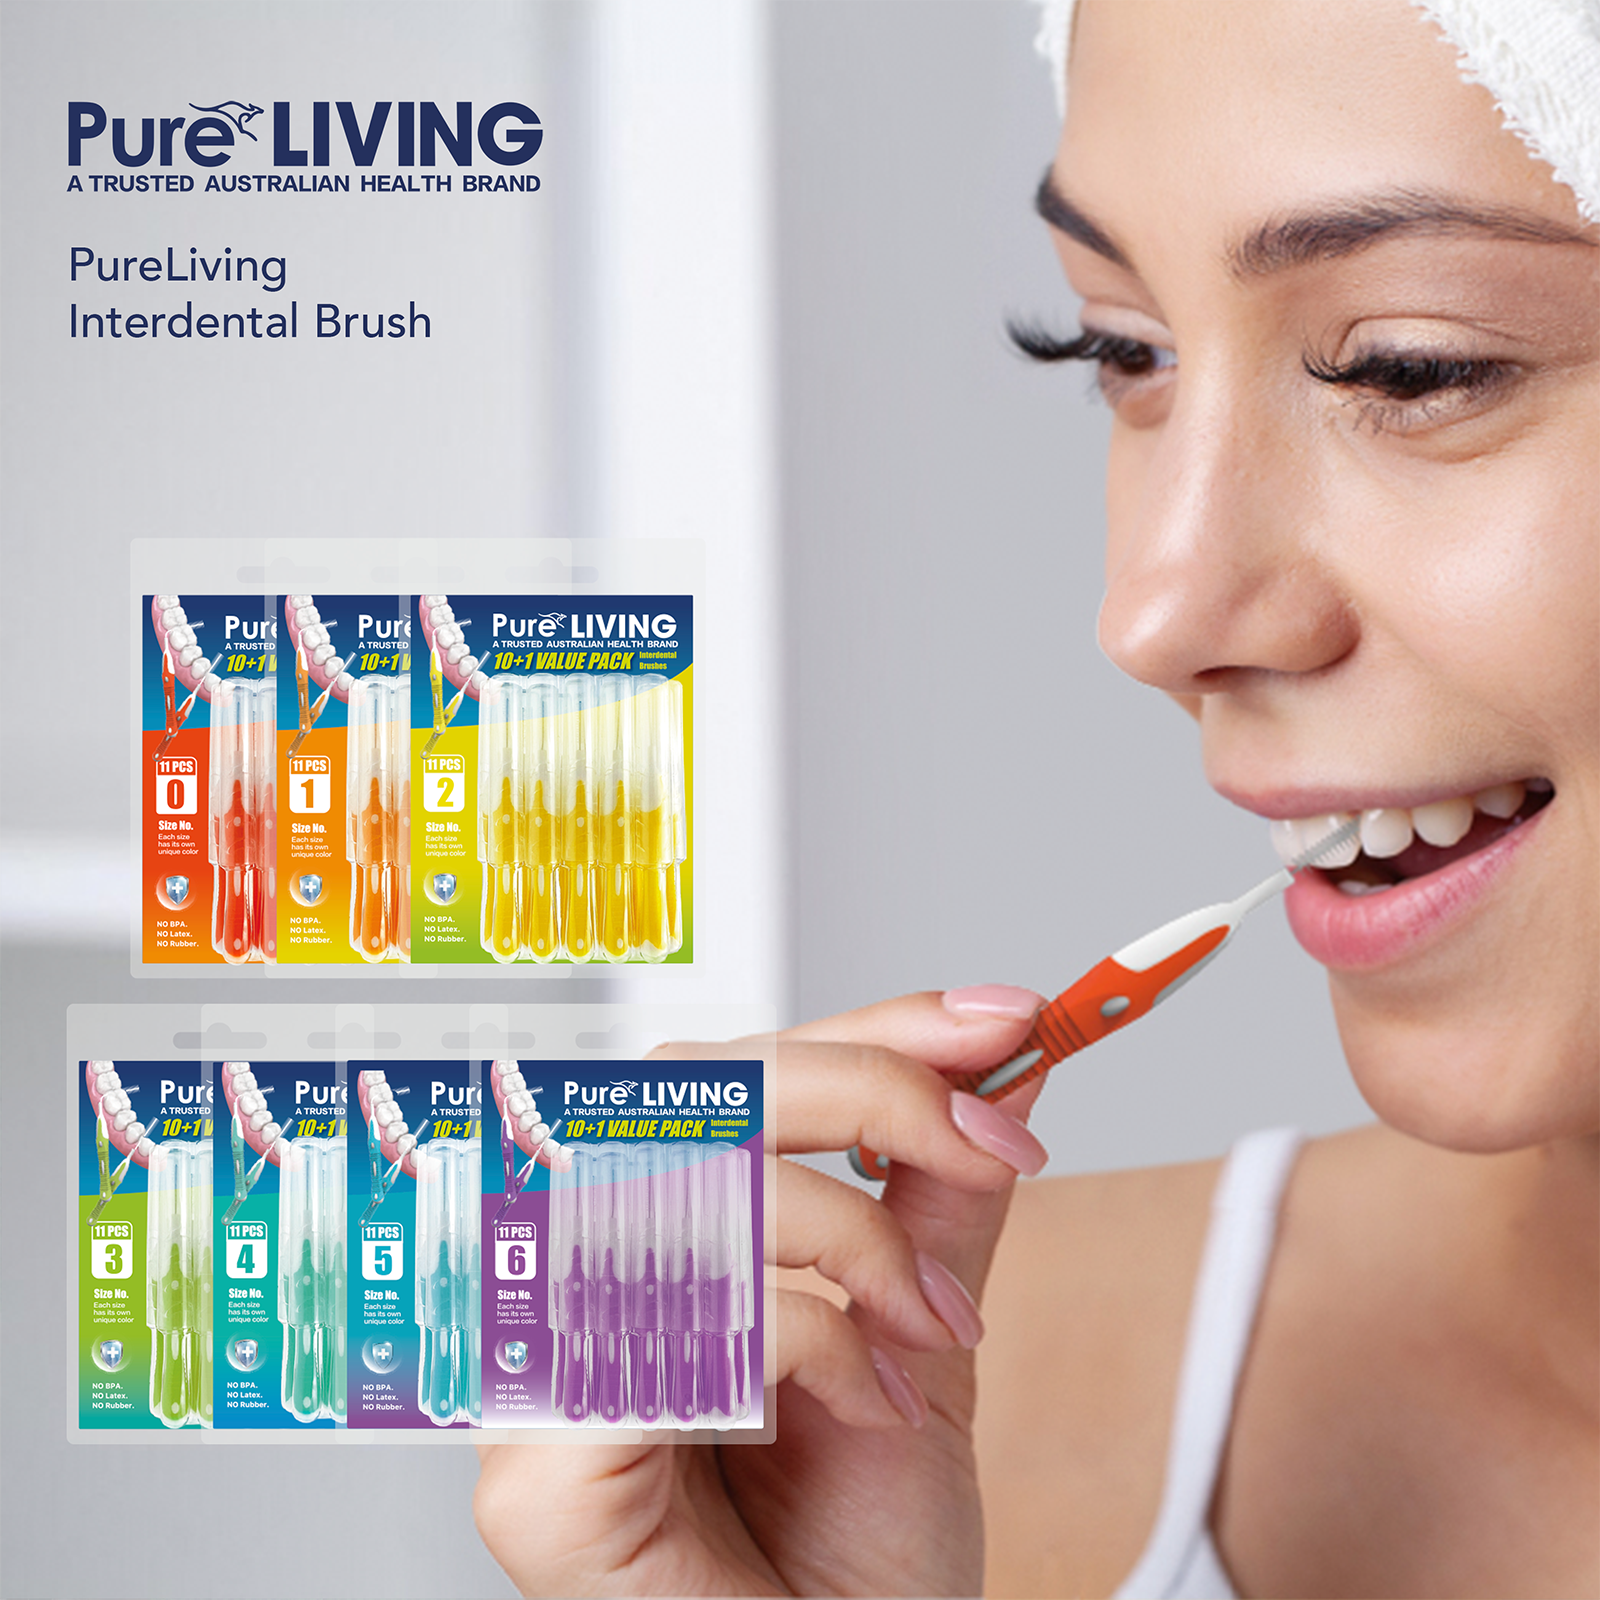 How to Choose the Right Interdental Brush Size?